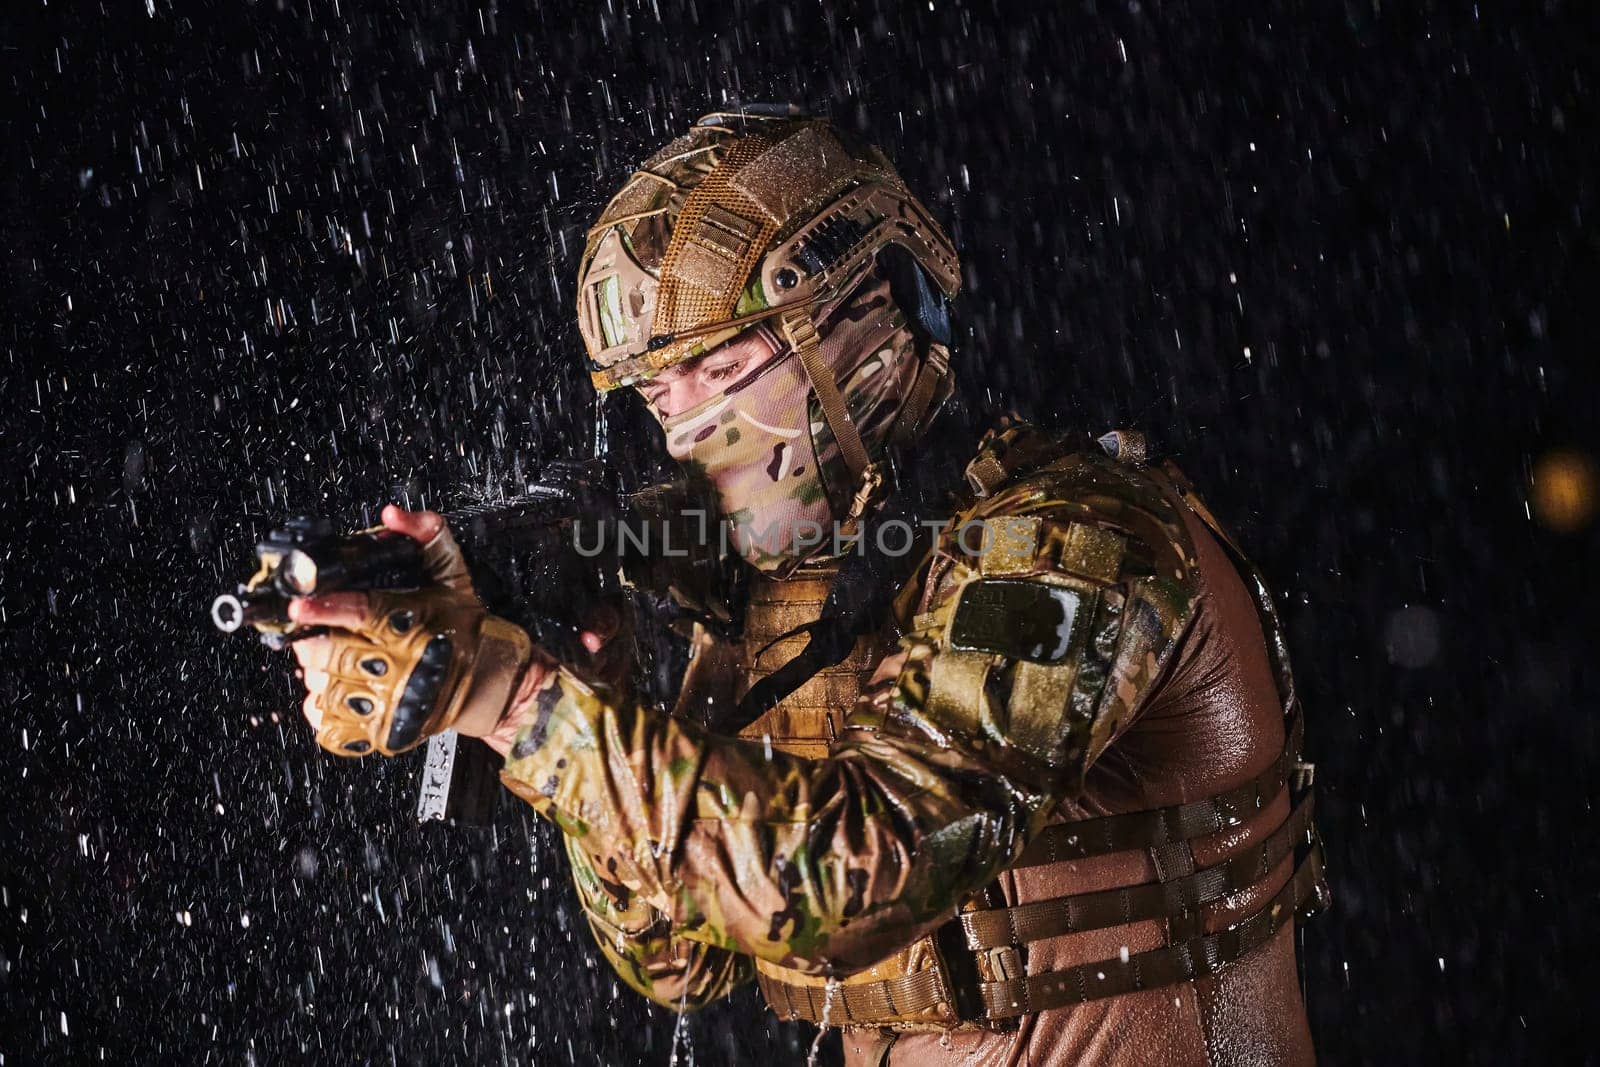 Army soldier in Combat Uniforms with an assault rifle, plate carrier and combat helmet going on a dangerous mission on a rainy night. by dotshock